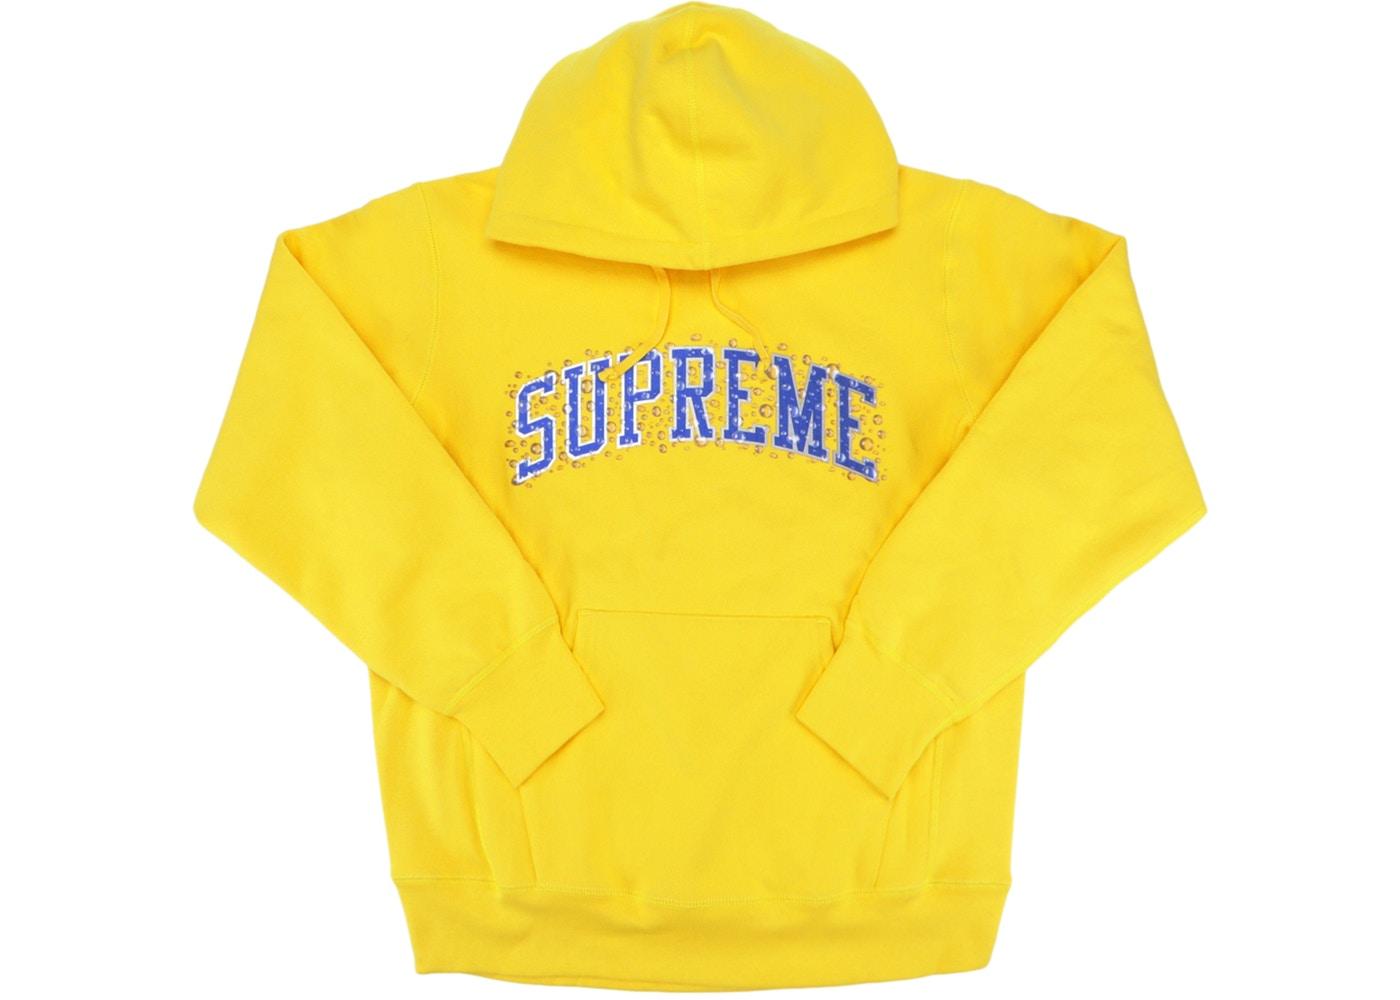 supreme water arc Hooded